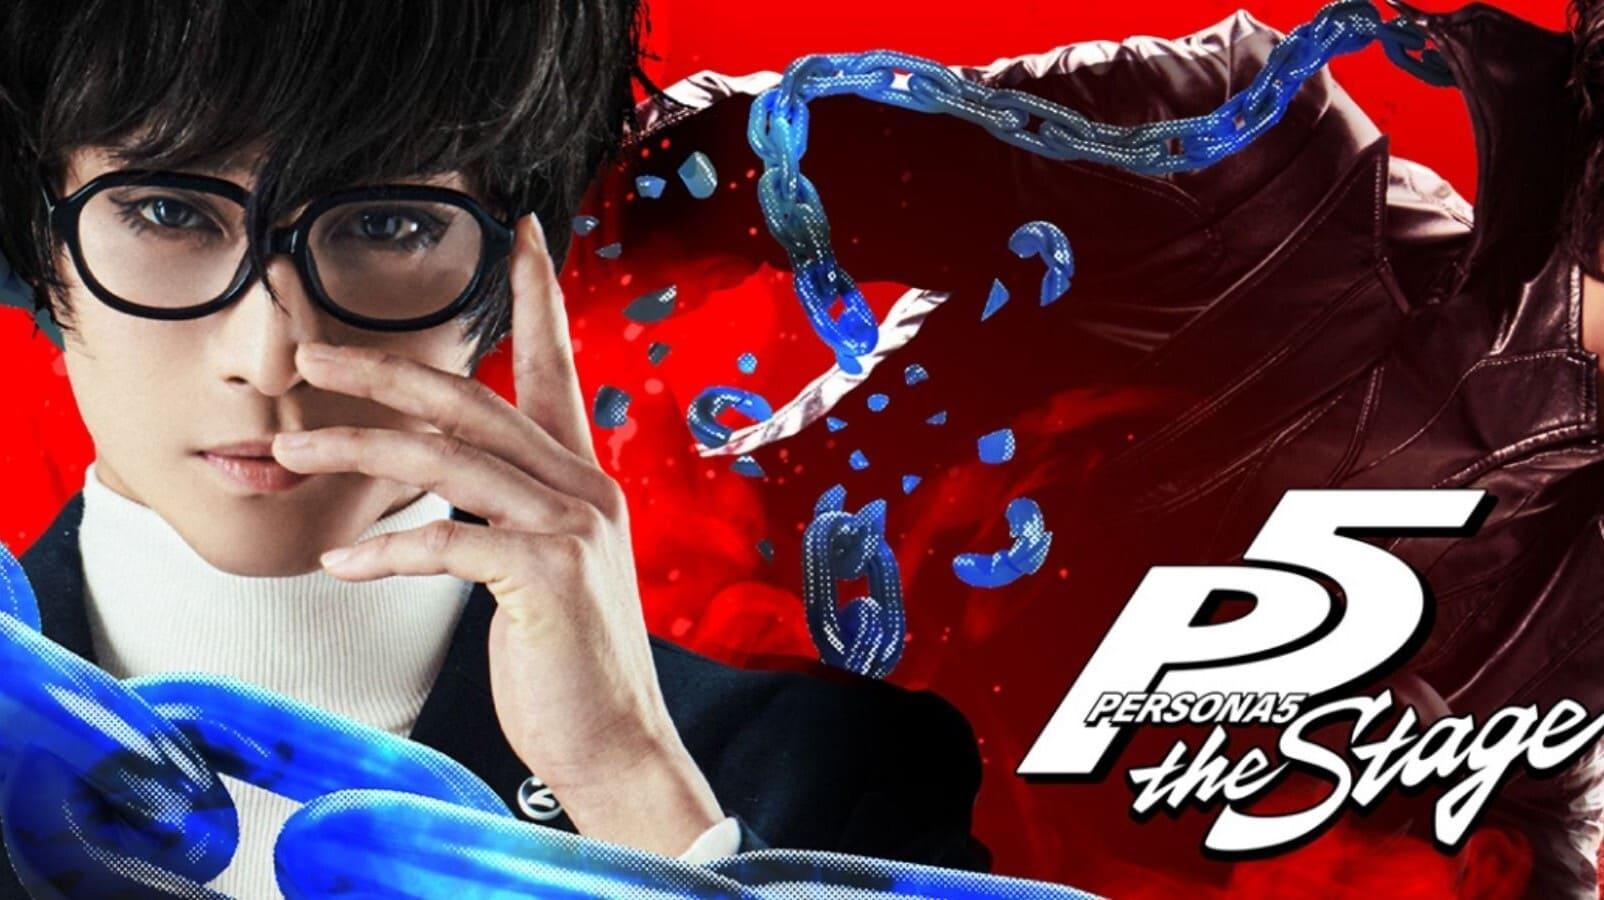 PERSONA5 the Stage backdrop